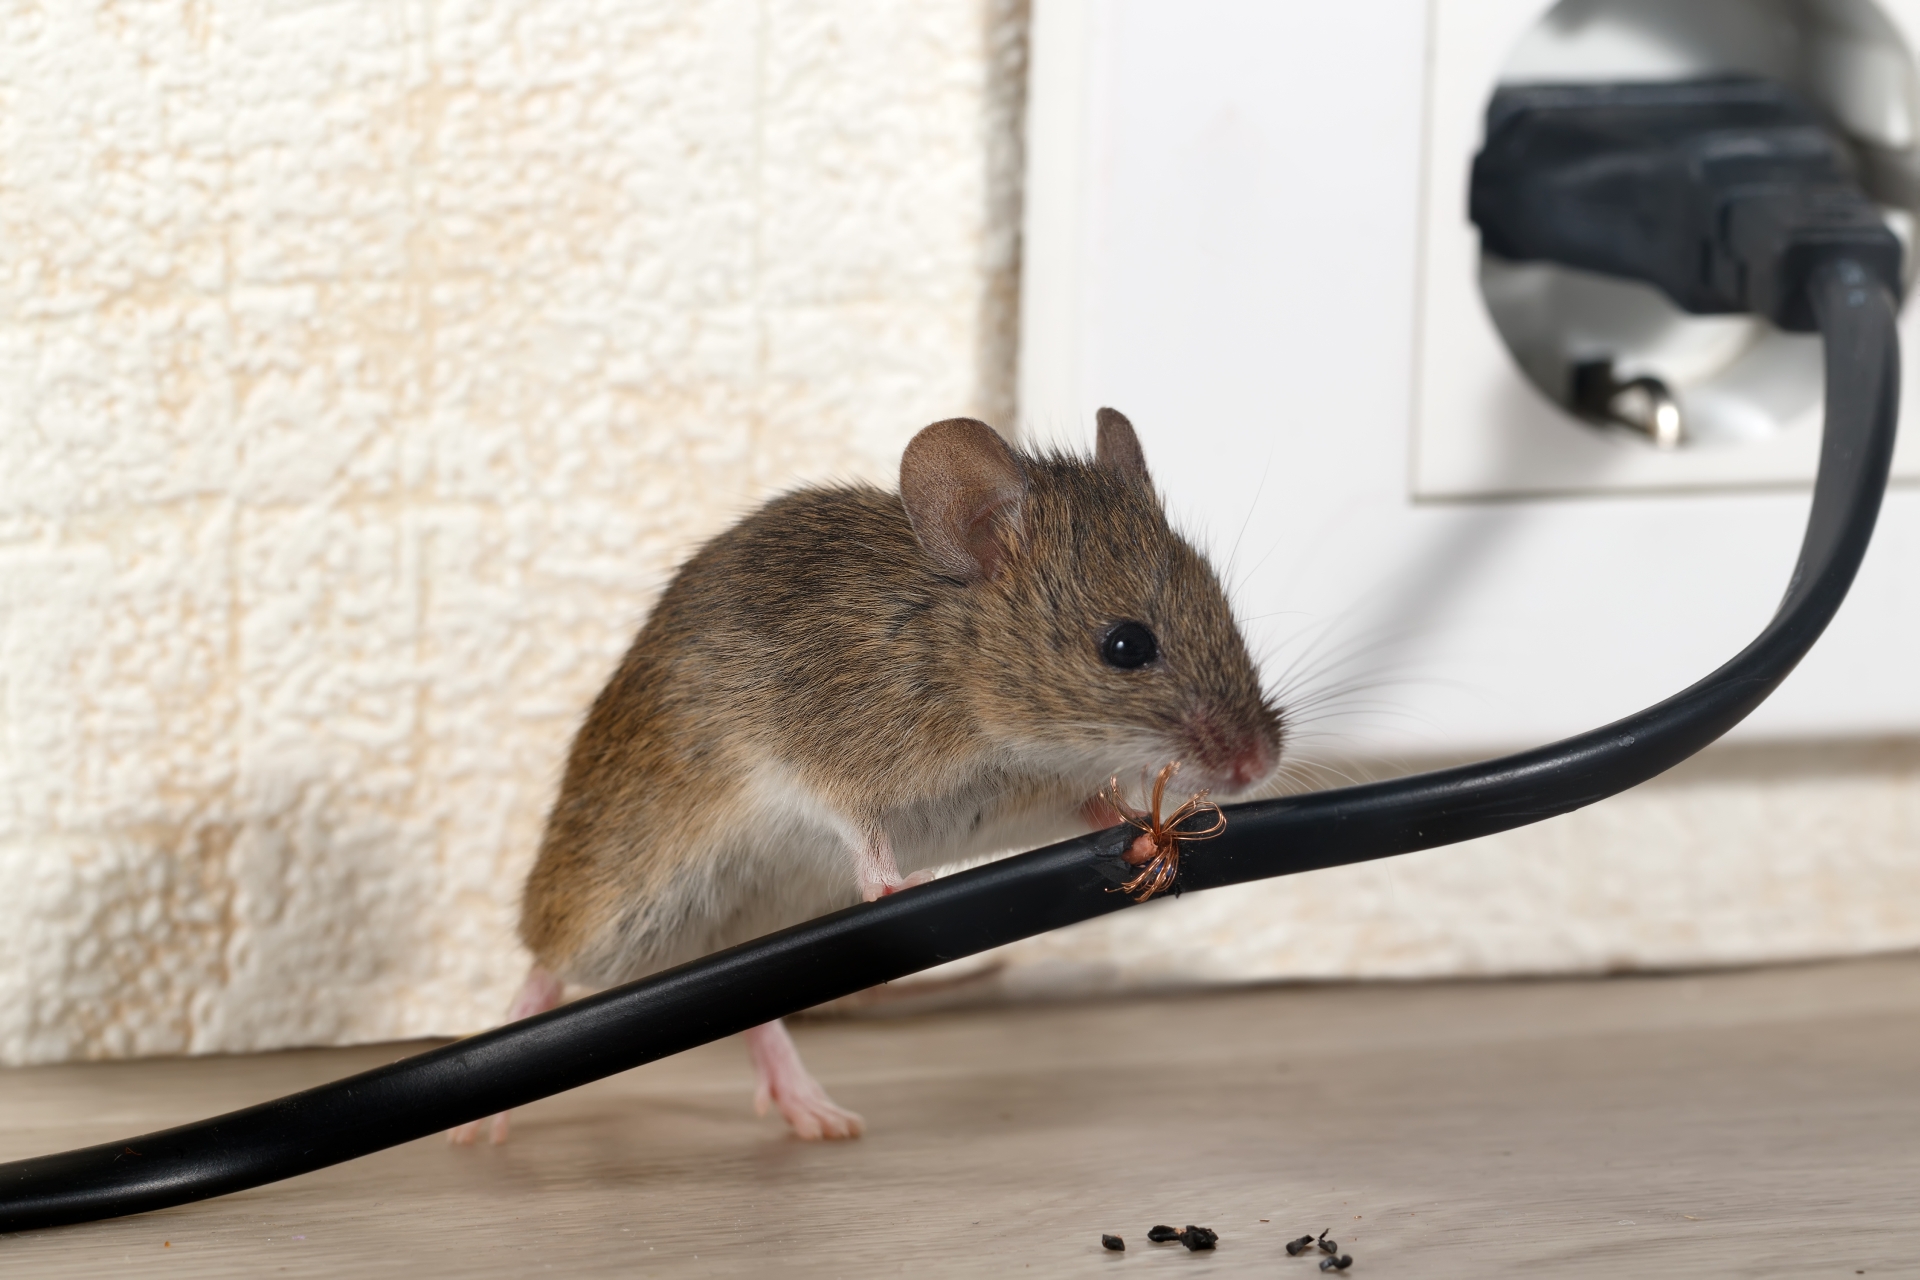 Mice Infestation, Pest Control in East Finchley, N2. Call Now 020 8166 9746